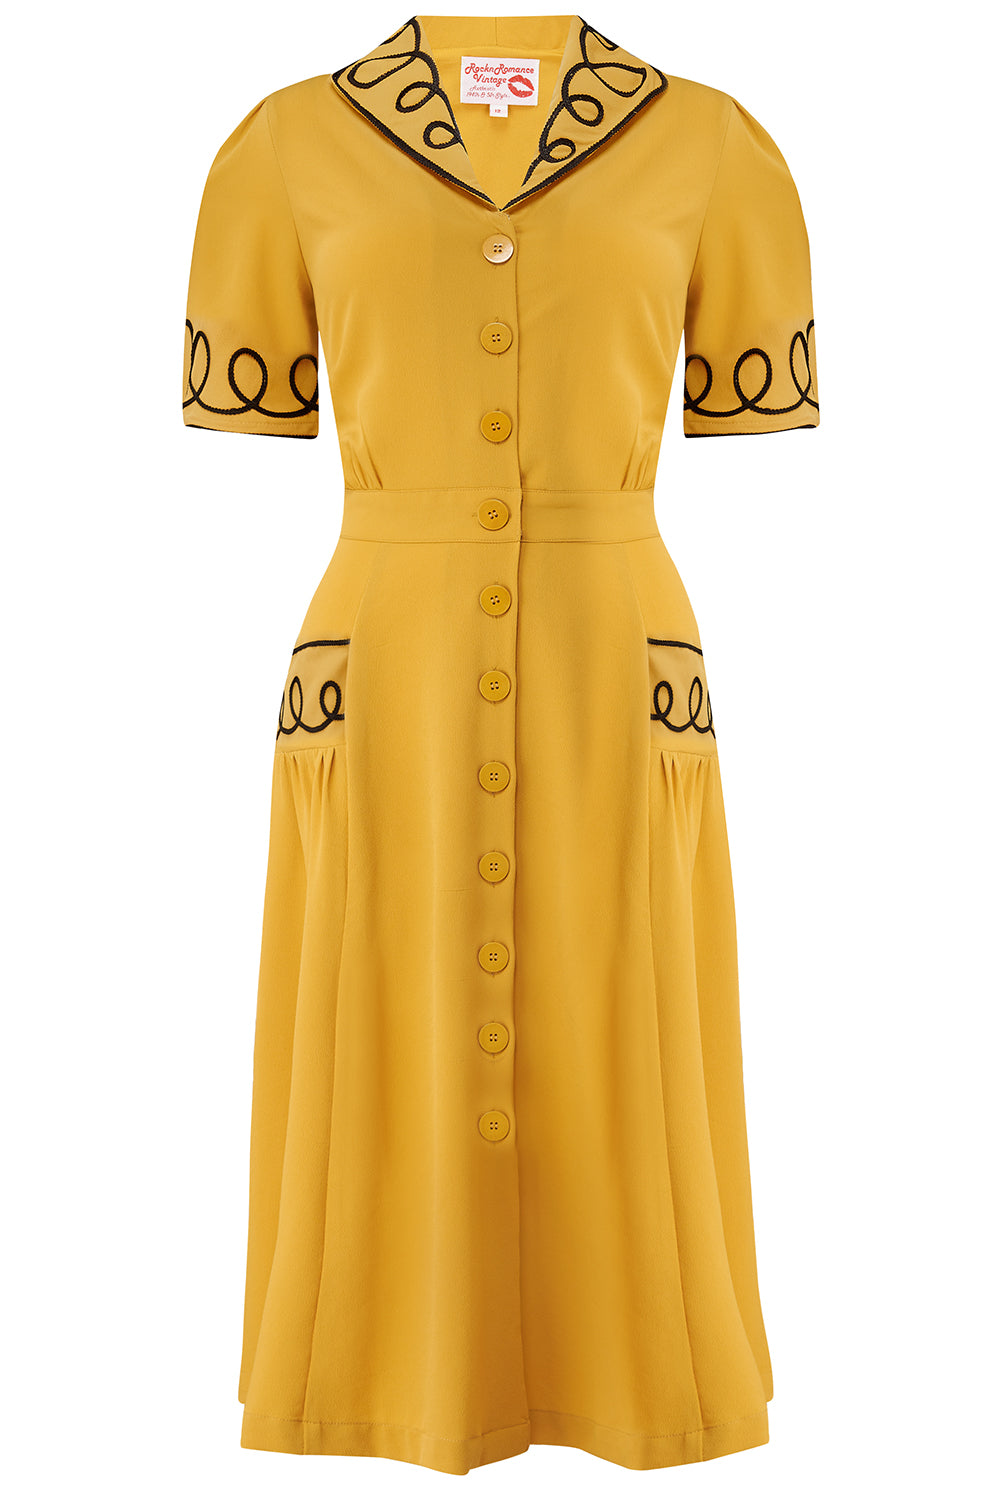 The "Loopy-Lou" Shirtwaister Dress in Mustard with Contrast Black RicRac, True 1950s Vintage Style